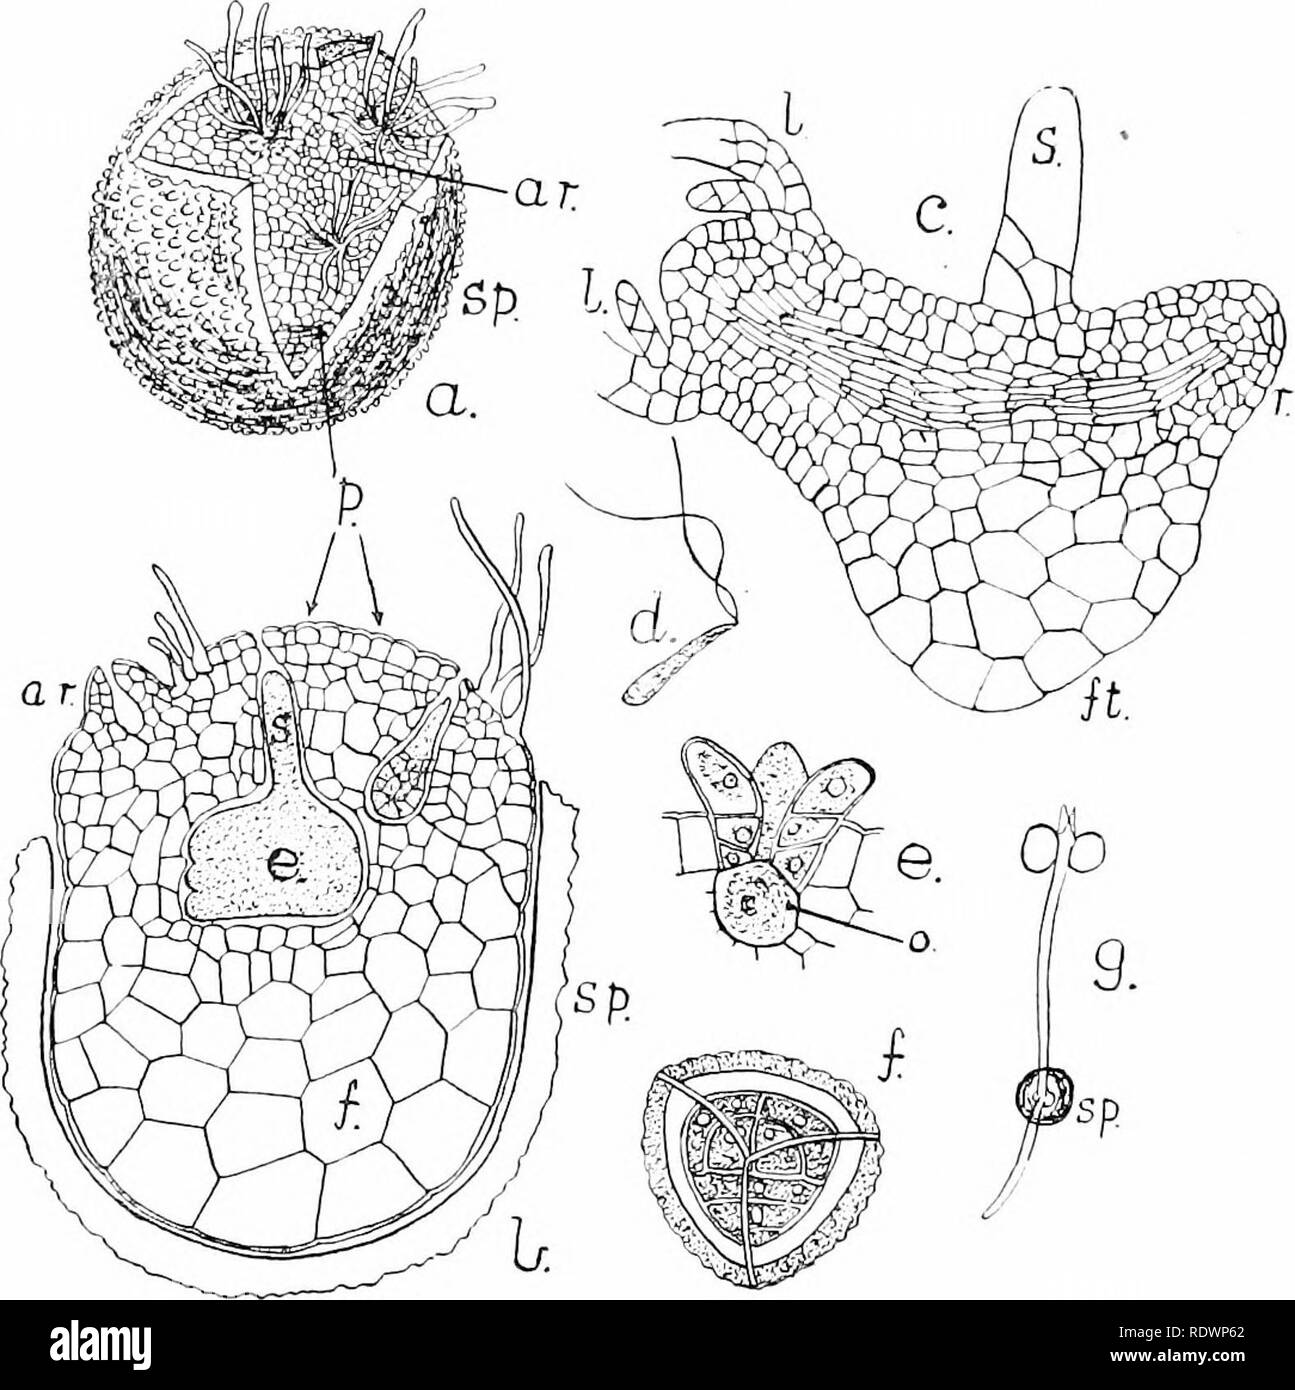 . An introduction to the structure and reproduction of plants. Plant anatomy; Plants. 320 SELAGINELLA to a terrestrial existence. Associated with the last-named feature we see the differentiation of proper conducting tissue and of true roots. Tliere is, moreover, a marked tendencj'' towards. Fig. iS^.—Sehi^iiwlhi, pruthallia and embryulogy. a. front view, and b. vertical section of mature megaspore witlr female jirothallus ; c, older embryo ; d, spermatozoid ; e, archegonium in longitudinal section ; /, microspore with contained male prothallus ; i;. voung plant still attached to the megas])or Stock Photo